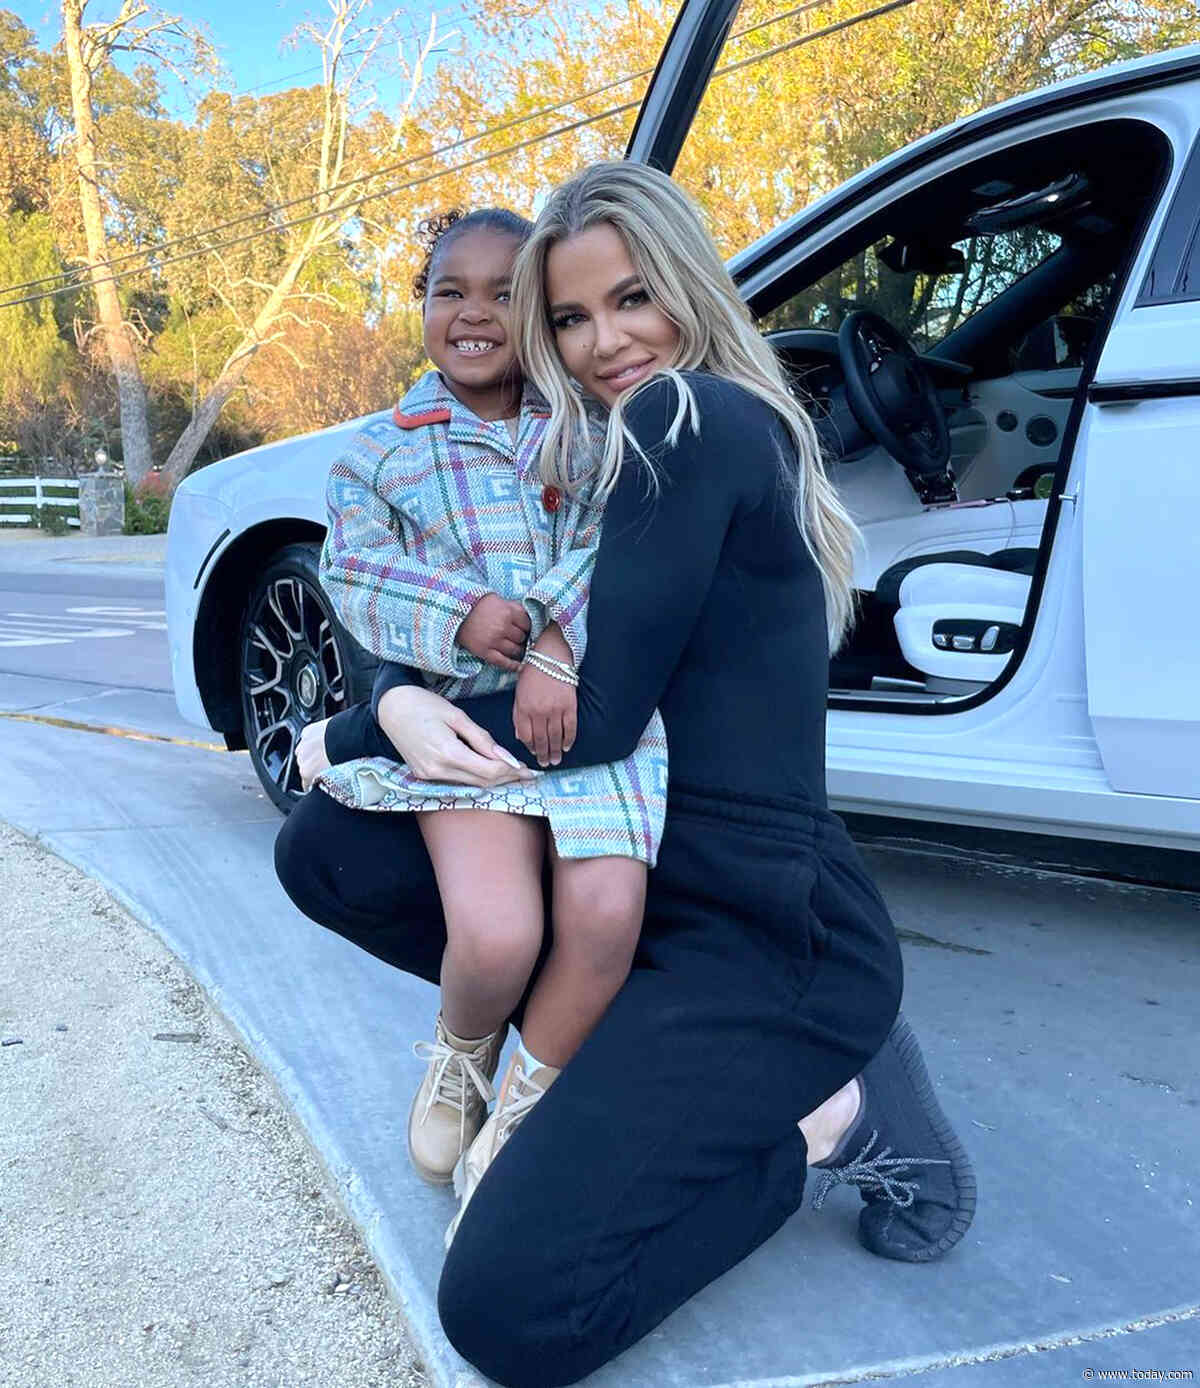 Khloé Kardashian shares video of True and Dream bringing ice cream to firefighters